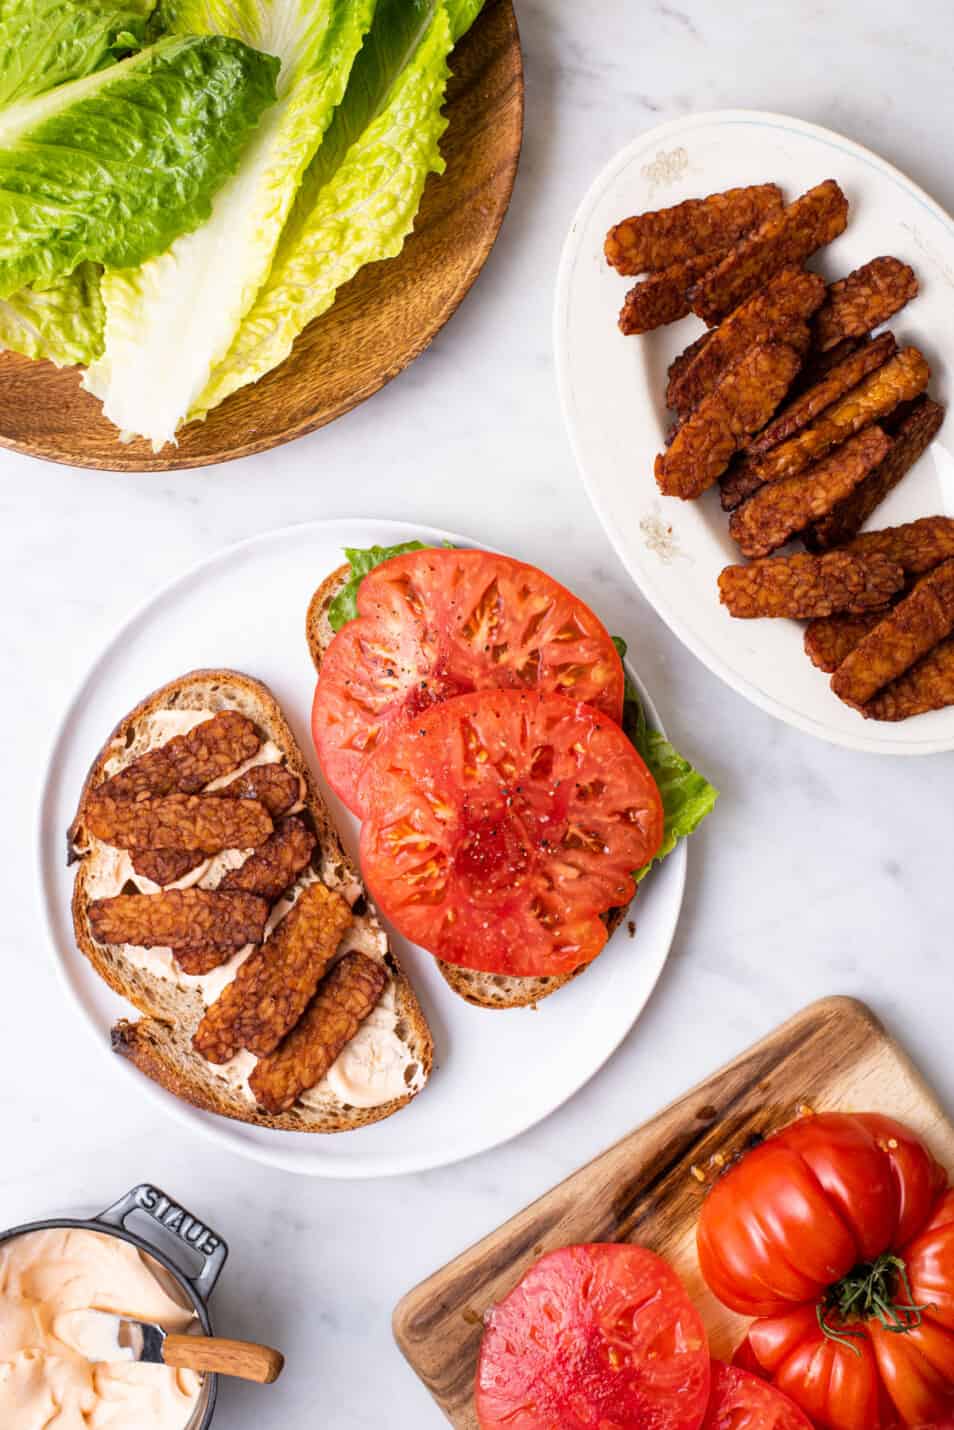 Work-from-home lunch ideas - Open-faced vegan BLT sandwich with tempeh bacon